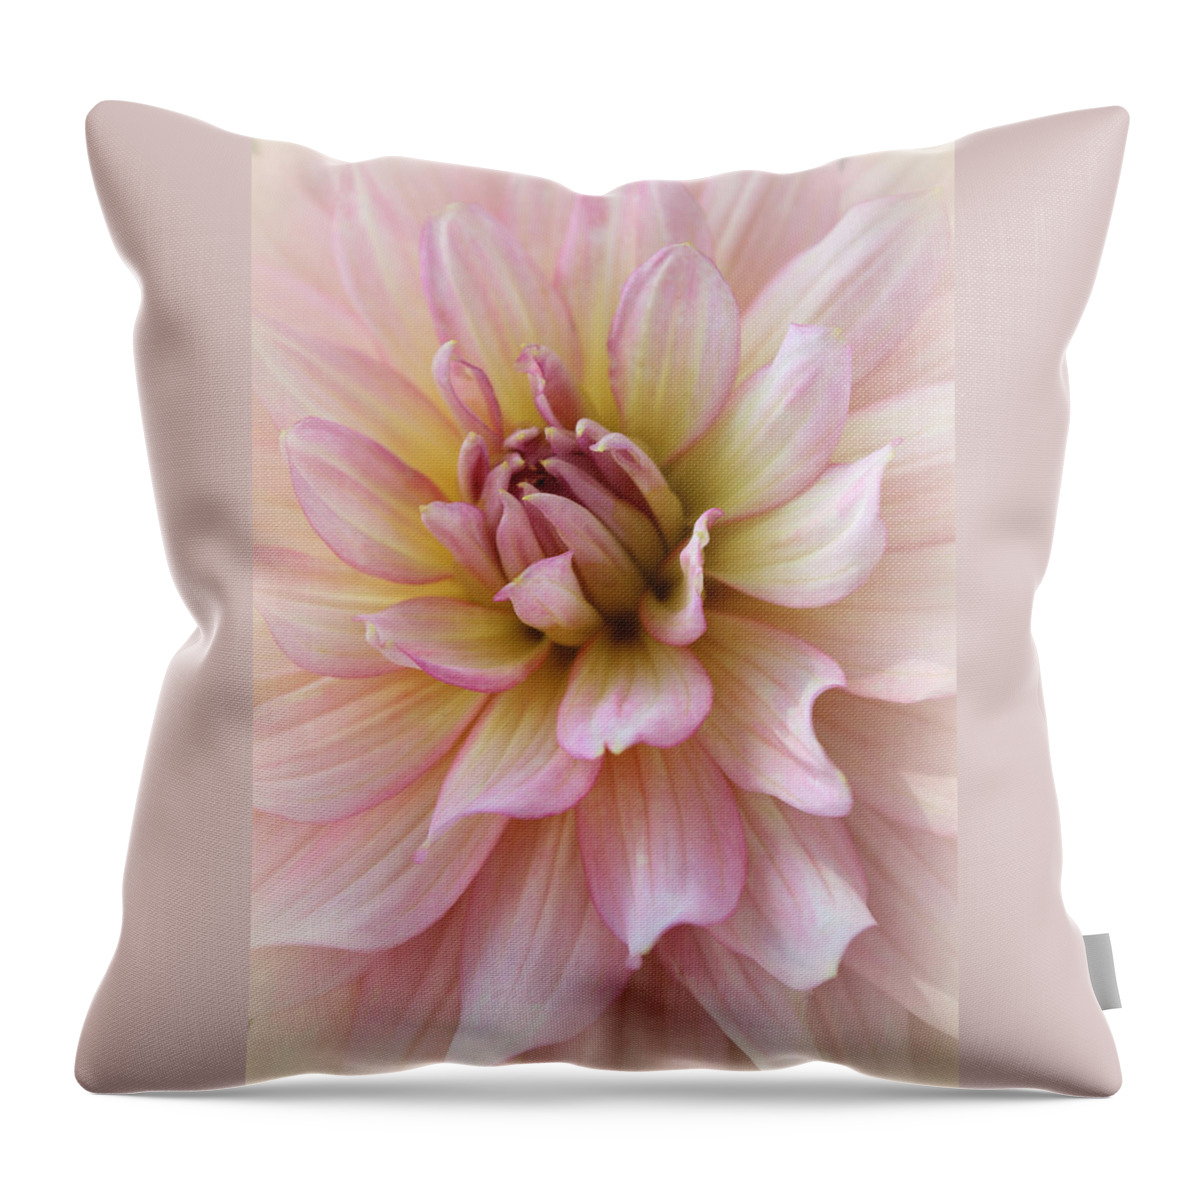 Dahlias Throw Pillow featuring the photograph Irresistible Beauty by The Art Of Marilyn Ridoutt-Greene